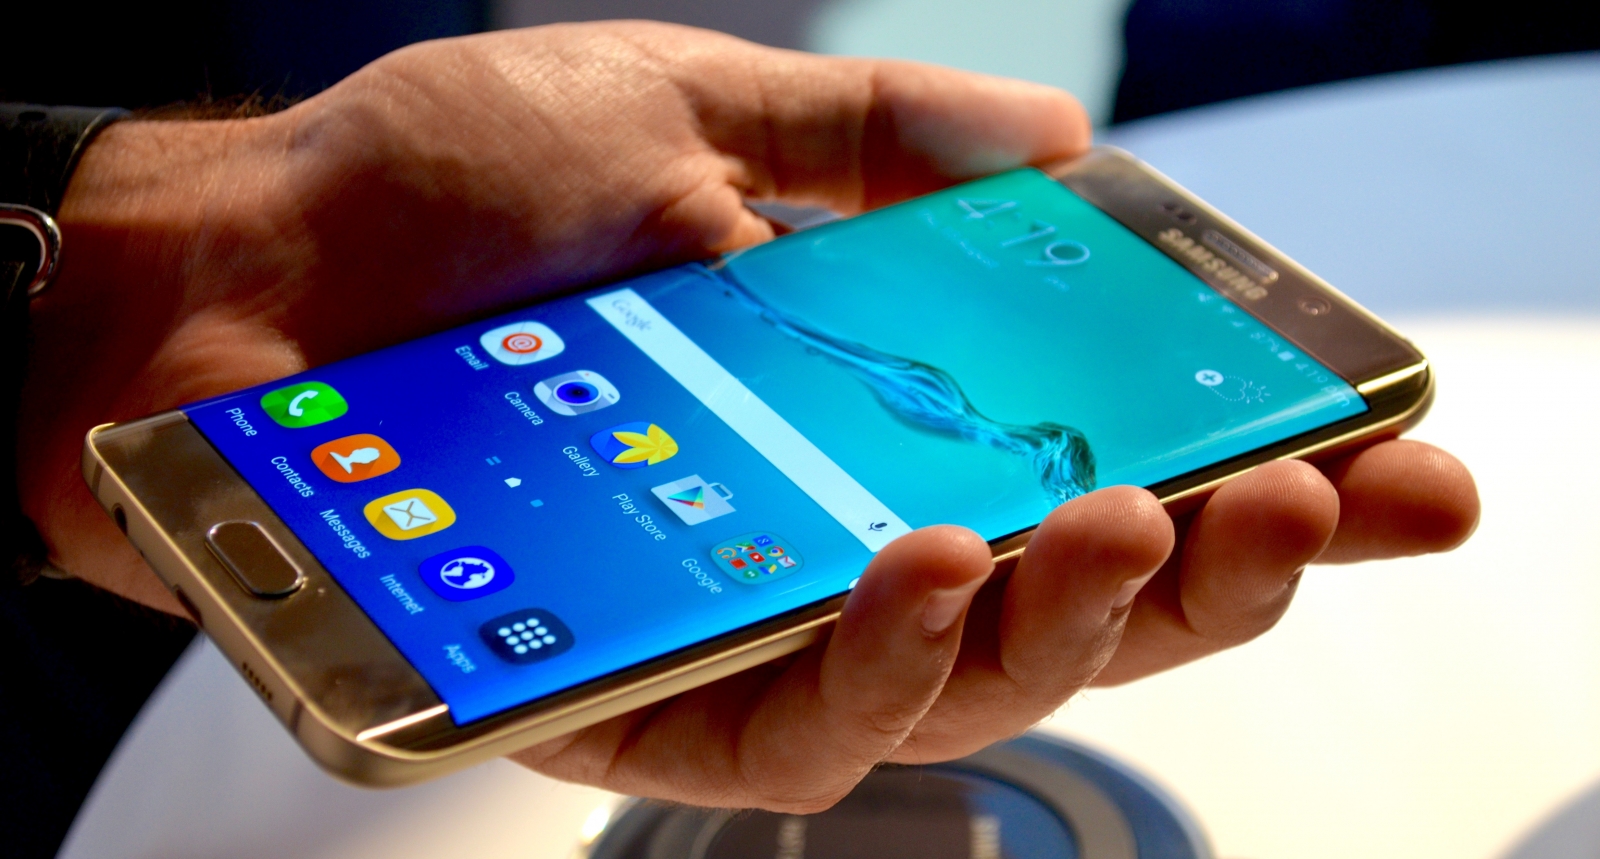 Samsung Galaxy S6 edge Plus hands-on: Is bigger better?